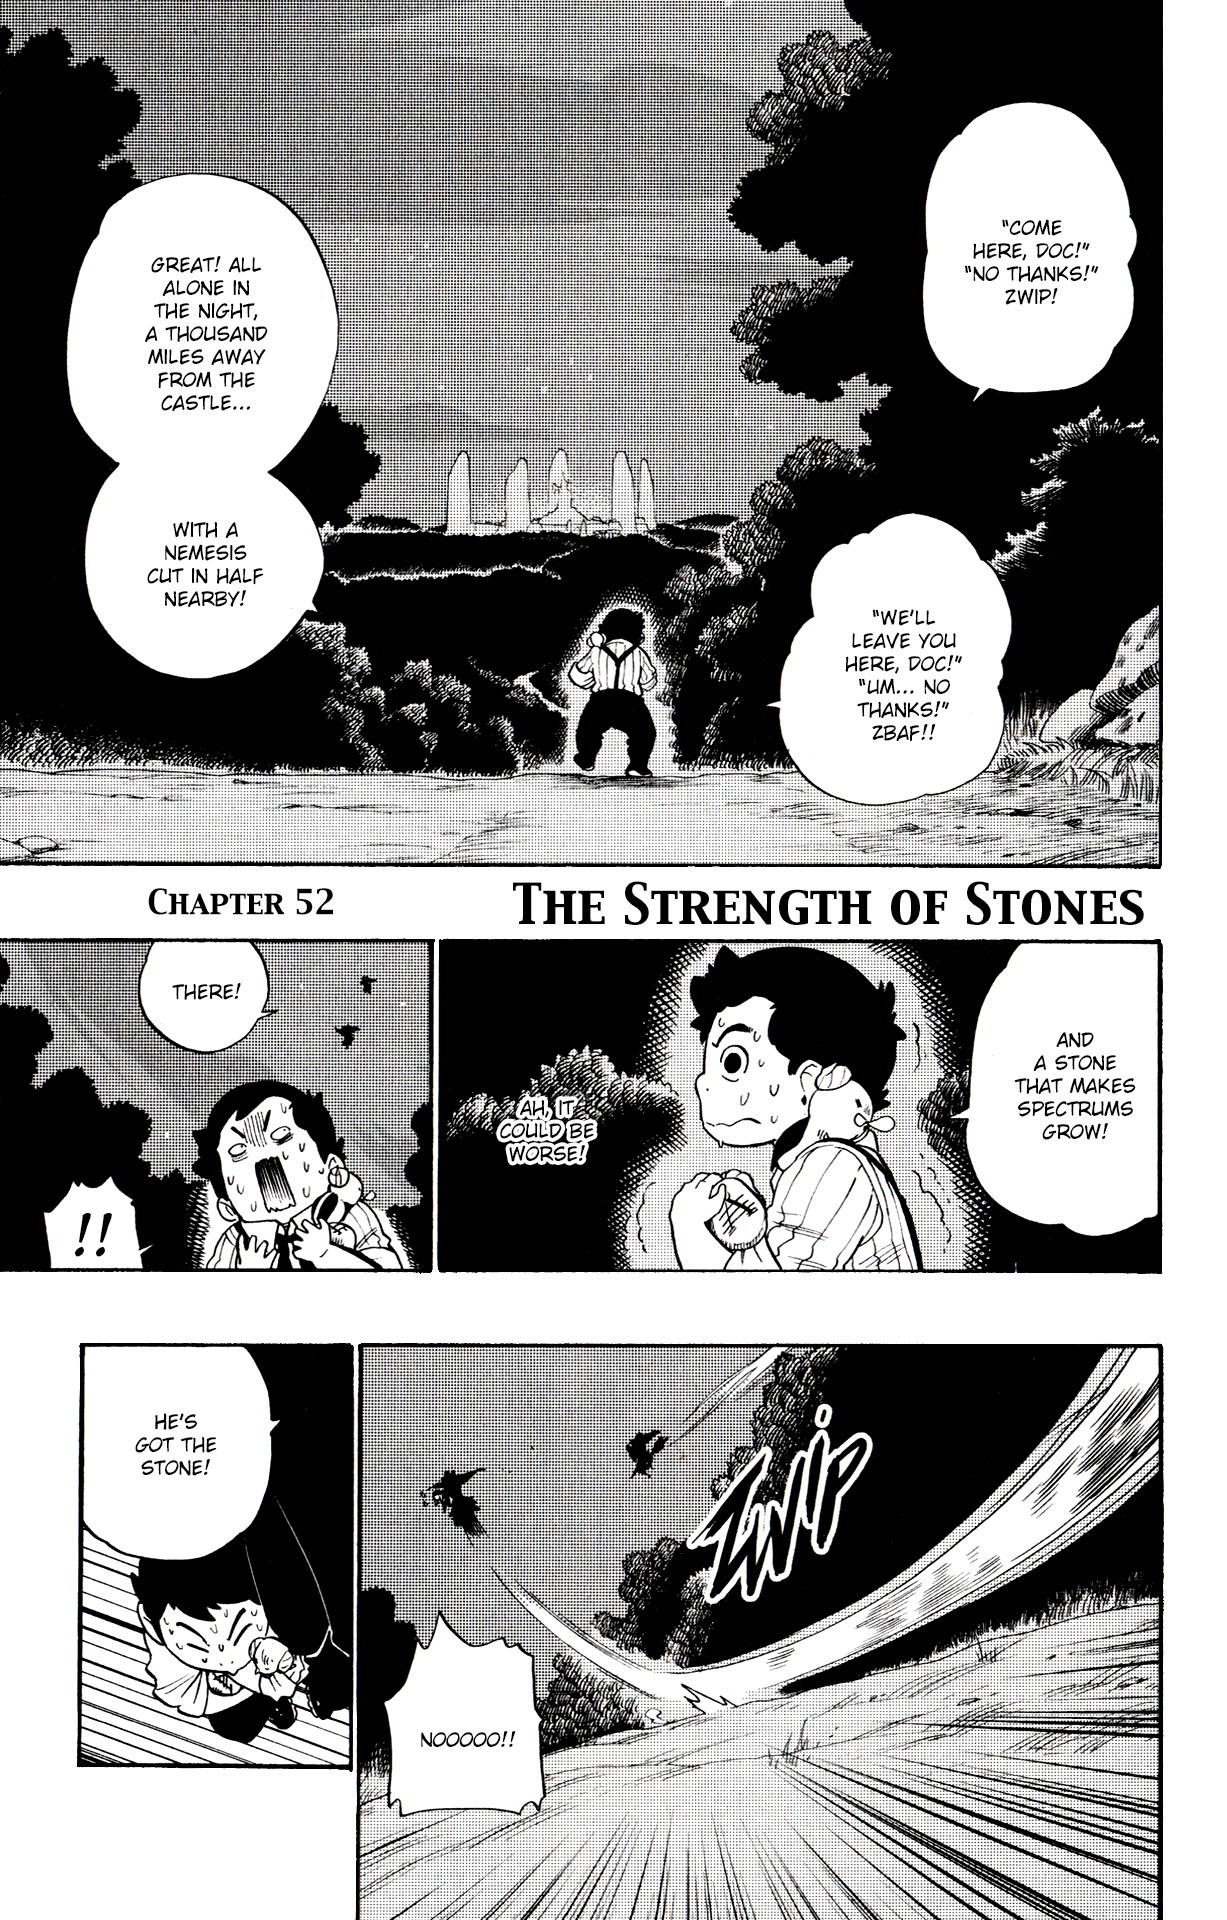 Radiant Vol. 7 Ch. 52 The Strength of Stones